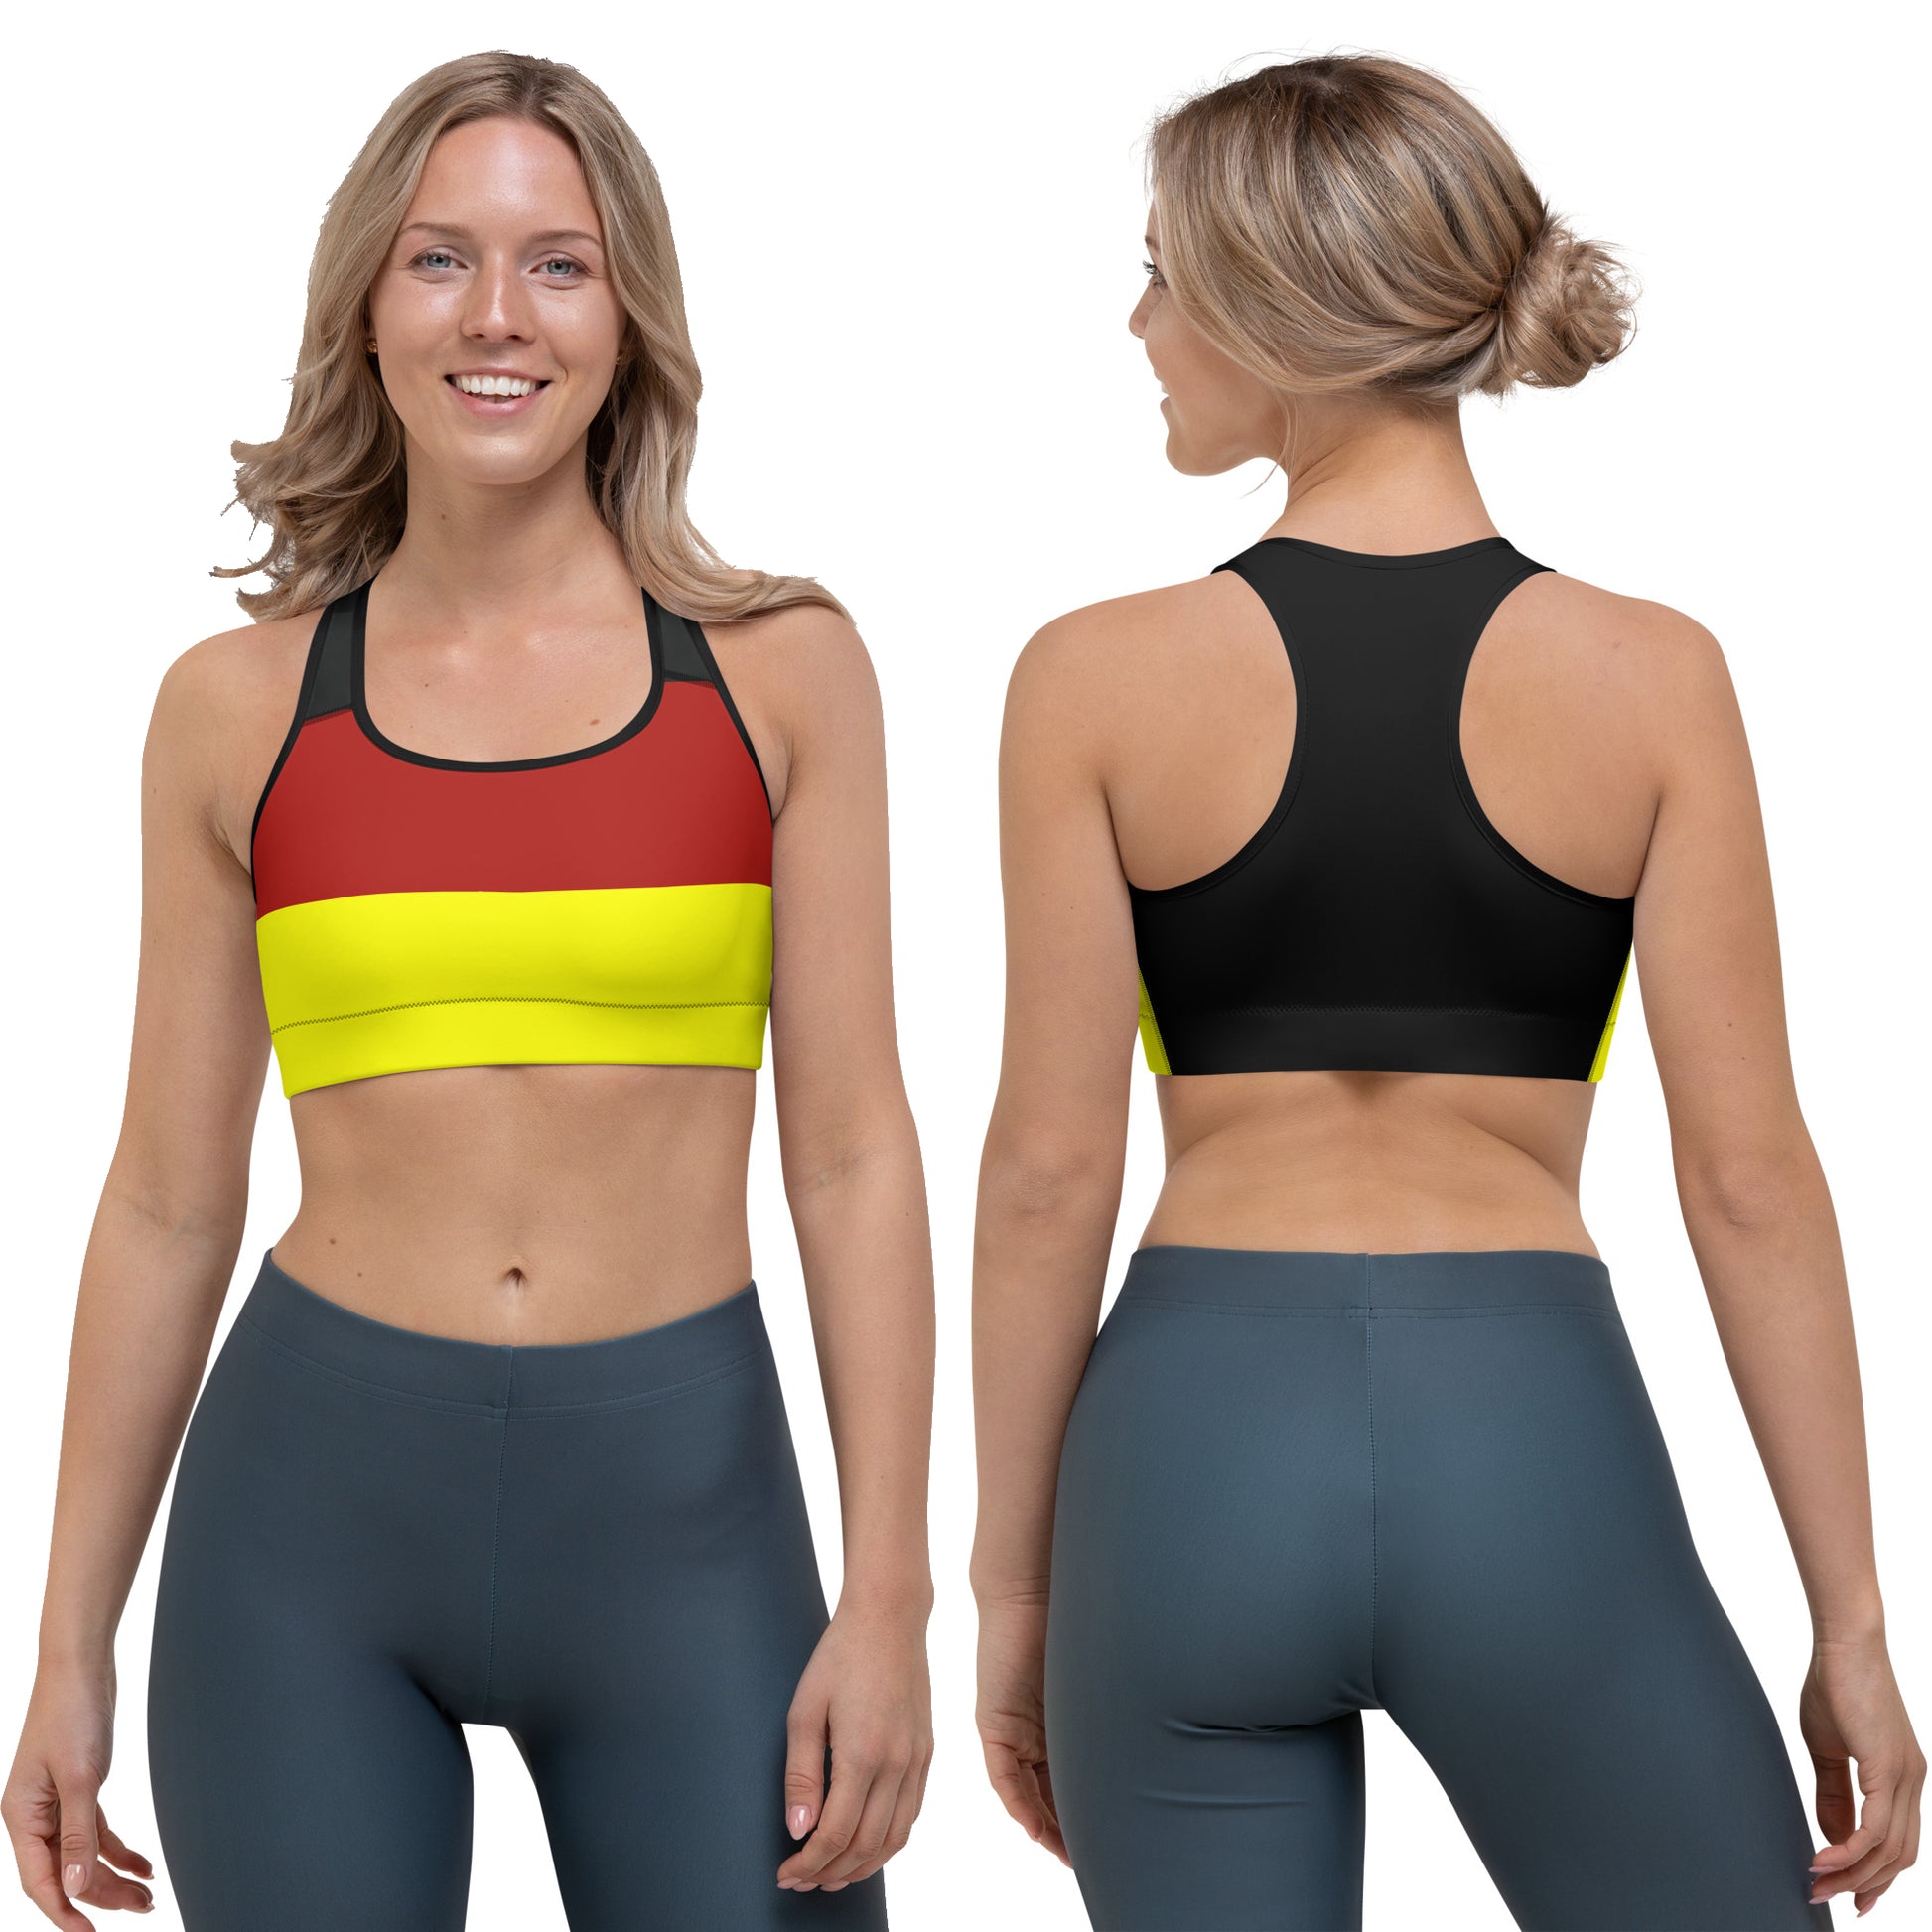 Germany Flag Sports Bra - Moisture-Wicking, Four-Way Stretch, and Double-Layered for Extra Support